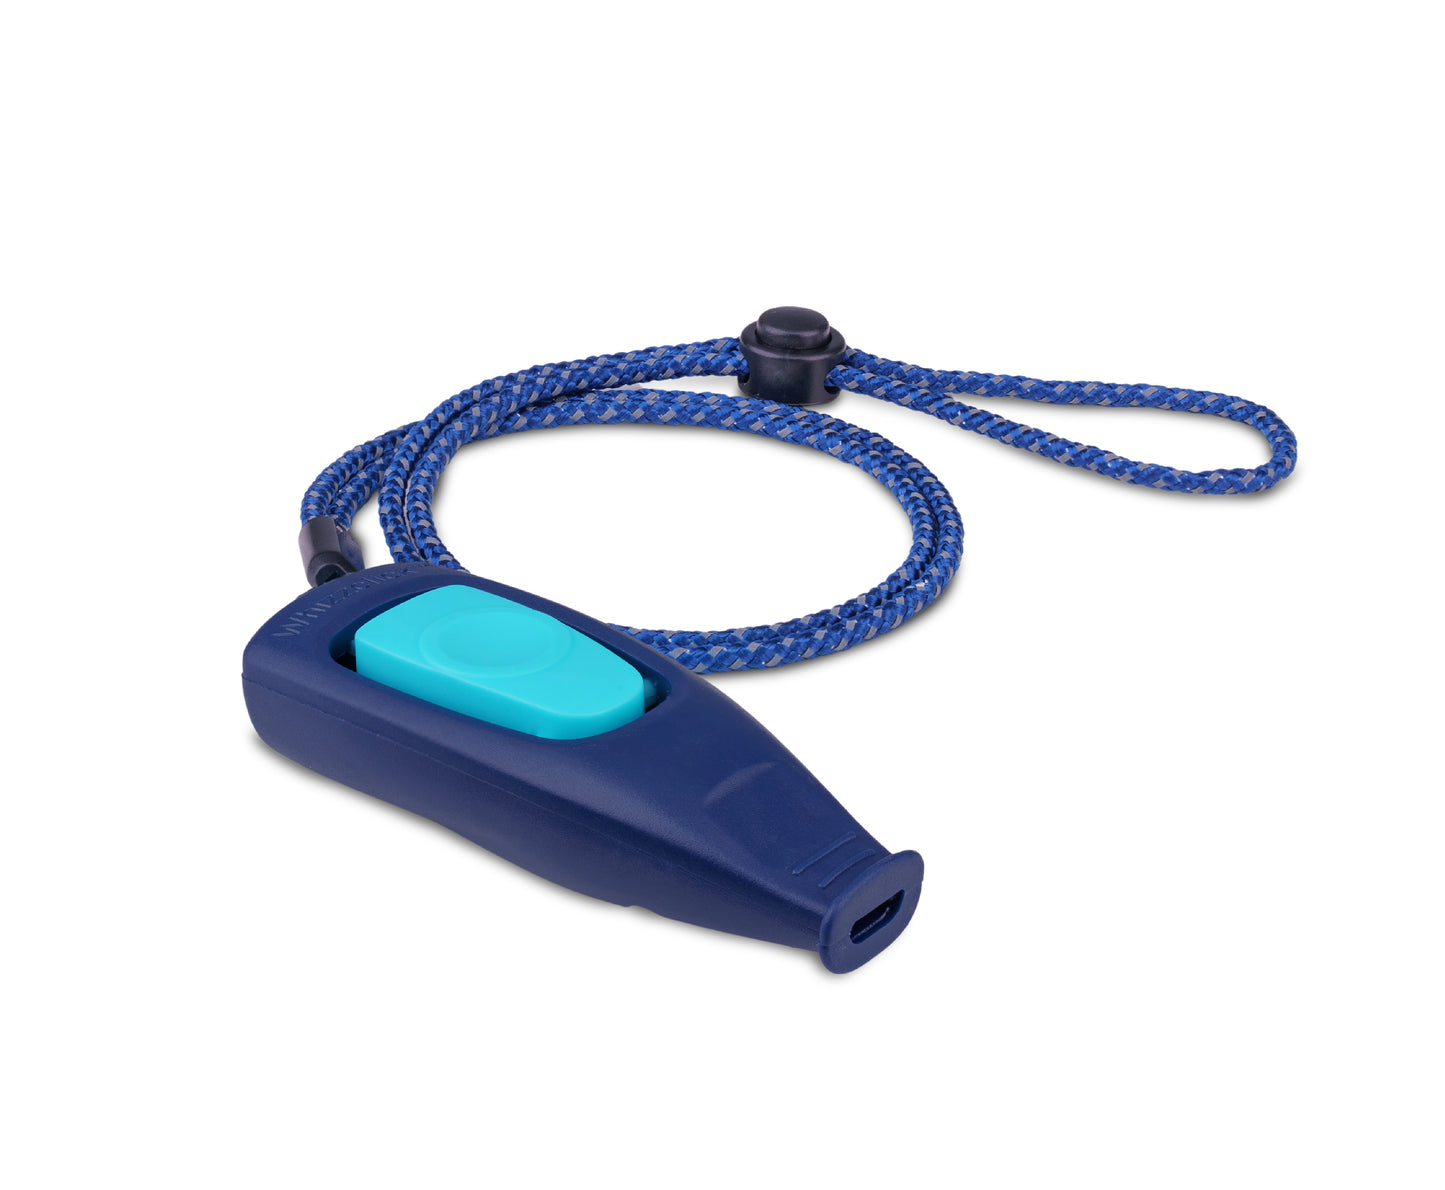 Coachi Whizzclick 2-in-1 Clicker & Whistle Navy & Light Blue